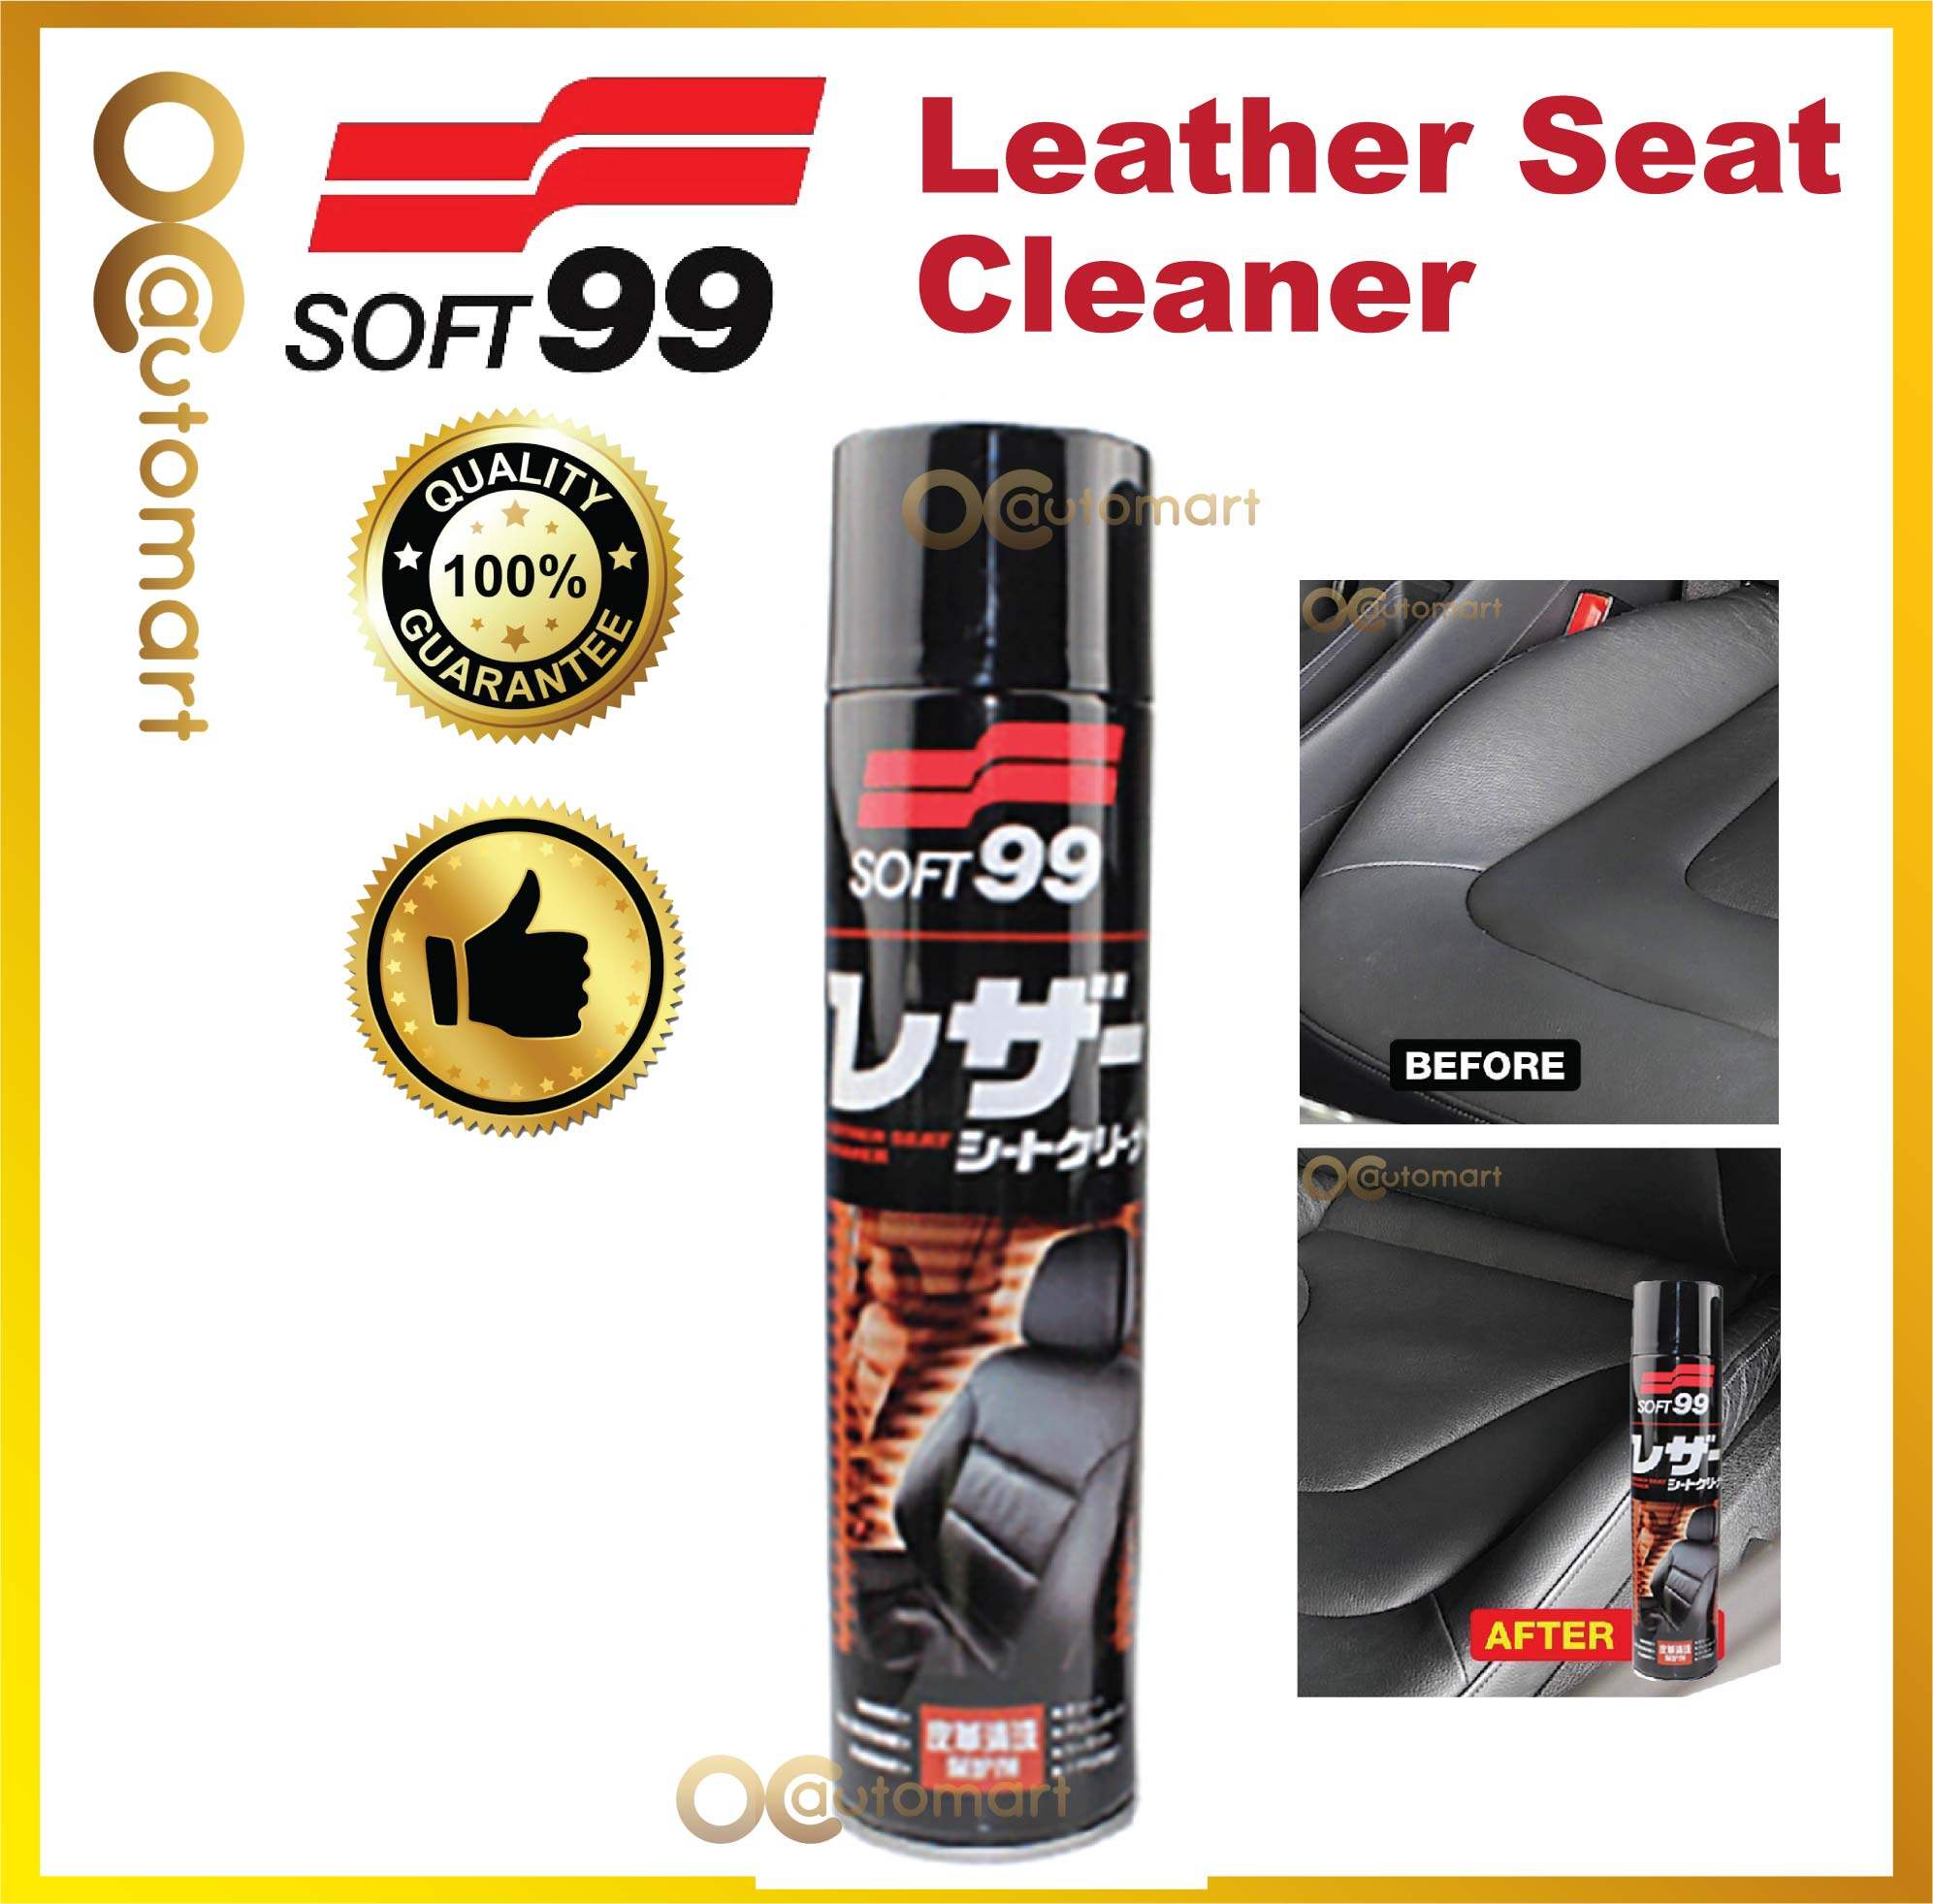 Soft99 / Soft 99 Leather Seat Cleaner - 600ml